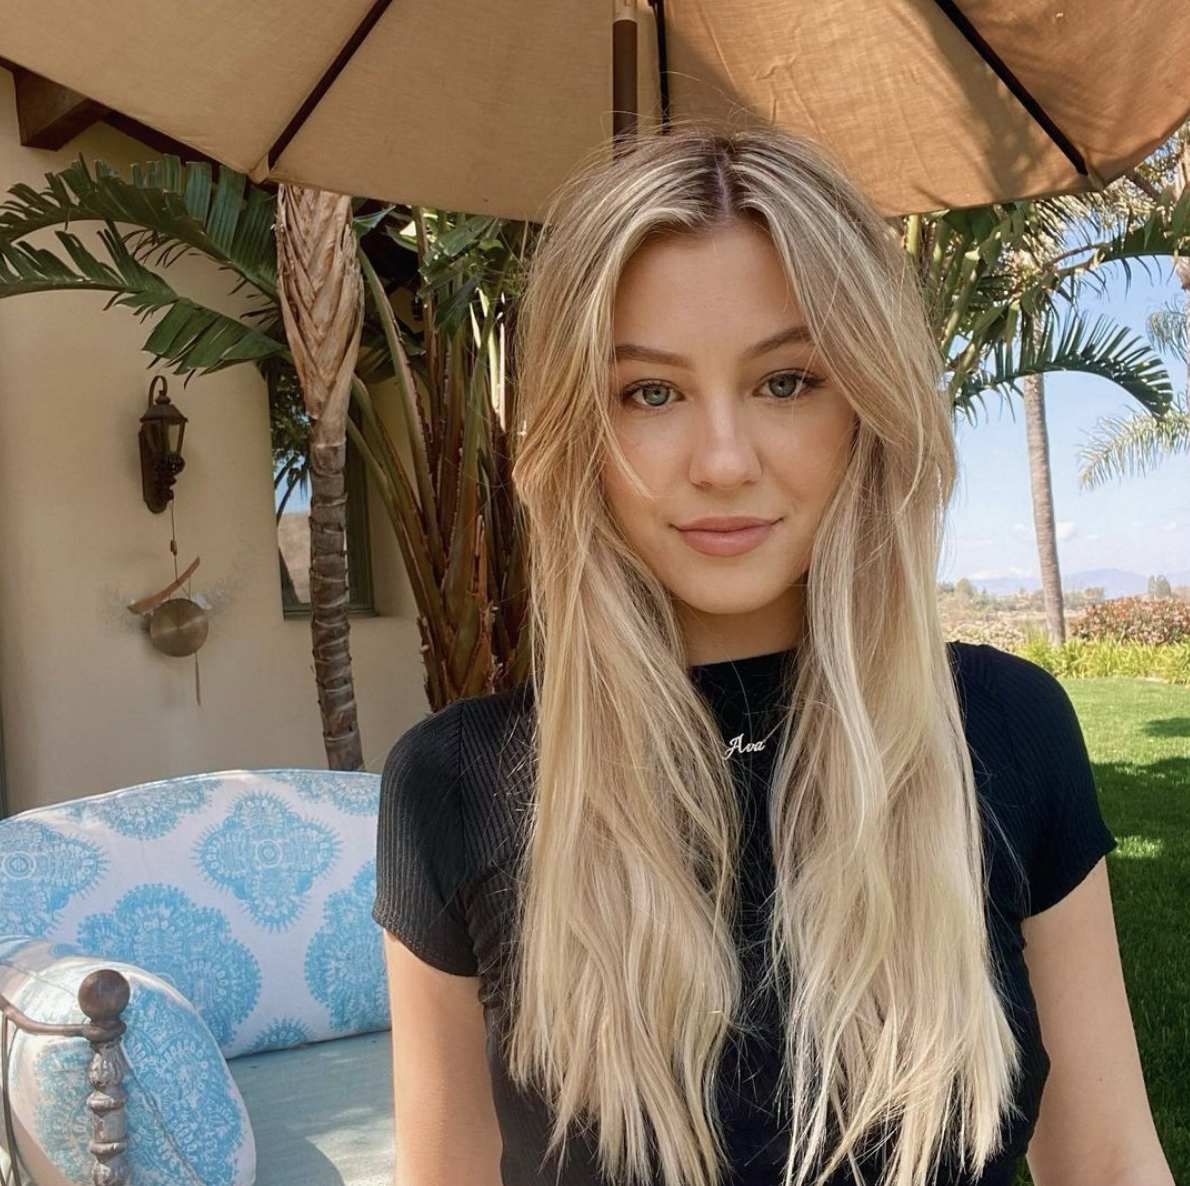 <p>Ava Sambora (who was born in 1997) posted this <a href="https://www.instagram.com/p/CUA-s1Xh9o9/">photo</a> on Instagram in September 2021 just a few weeks before her 24th birthday. <a href="https://www.wonderwall.com/news/heather-locklear-celebrates-daughter-ava-samboras-college-graduation-photos-350362.article">In 2020, Ava graduated from Loyola Marymount University</a> in Southern California with a degree in psychology and a minor in women's and gender studies.</p>